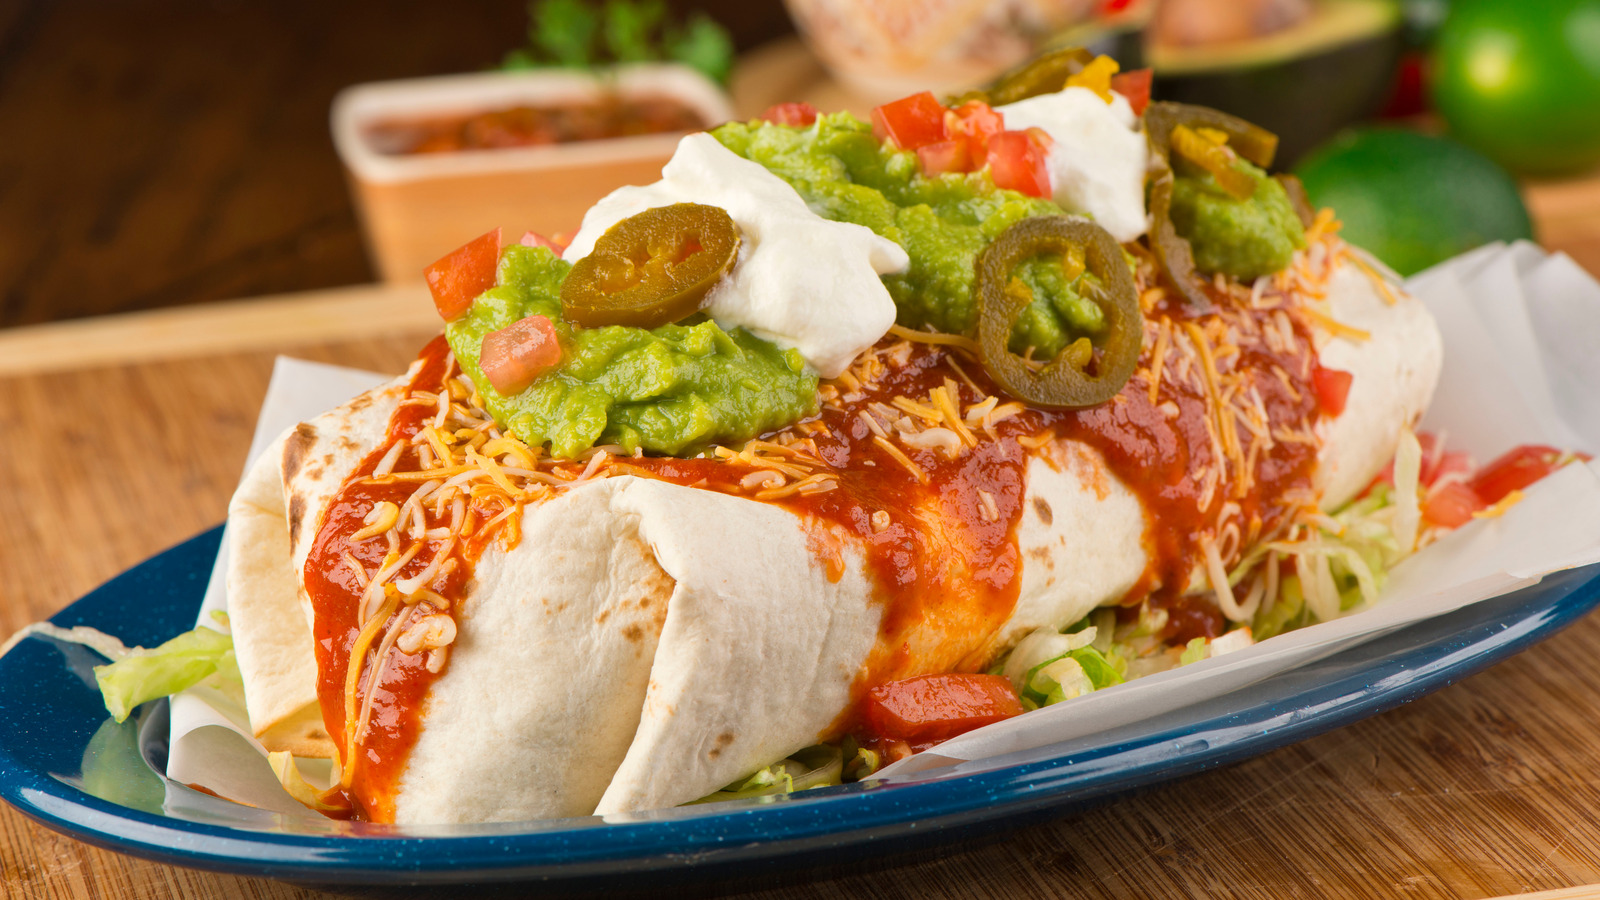 What's The Difference Between Tex-Mex And Mexican Food?